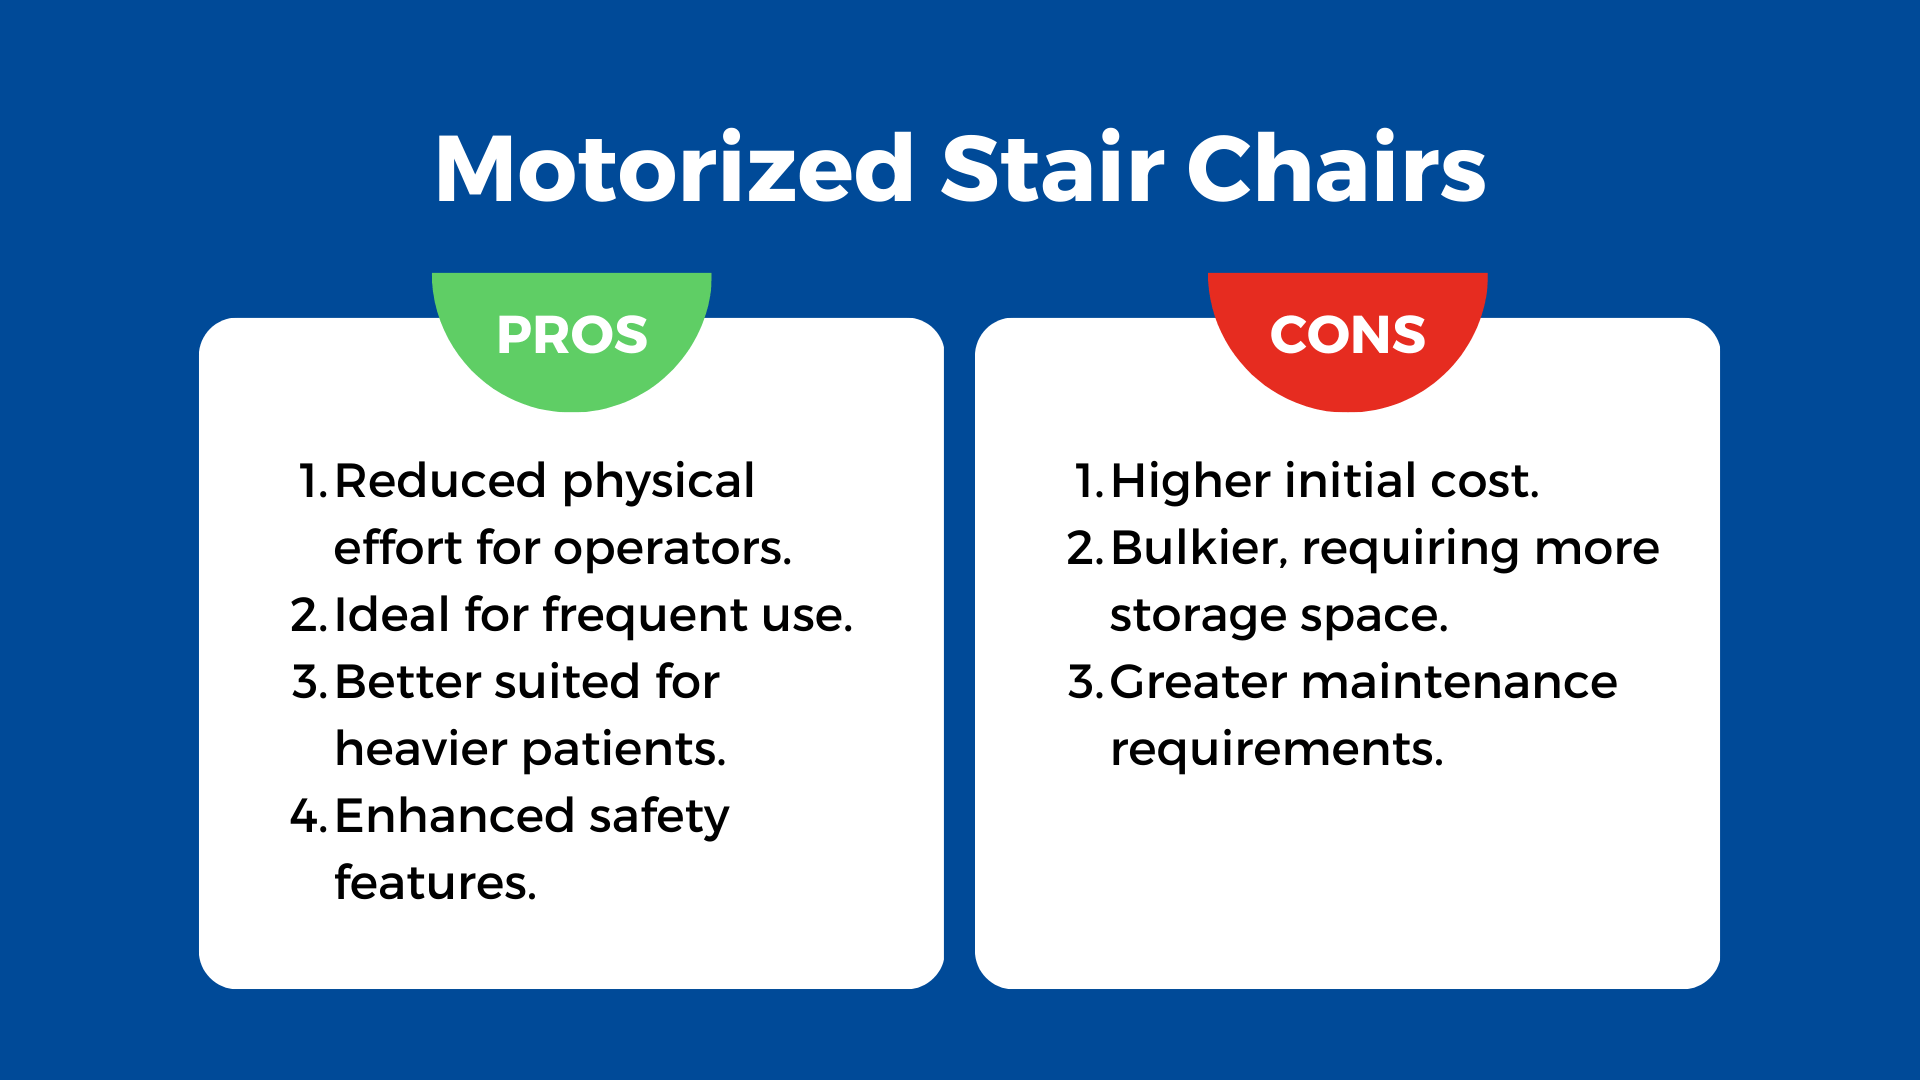 pros and cons of motorized stair chair